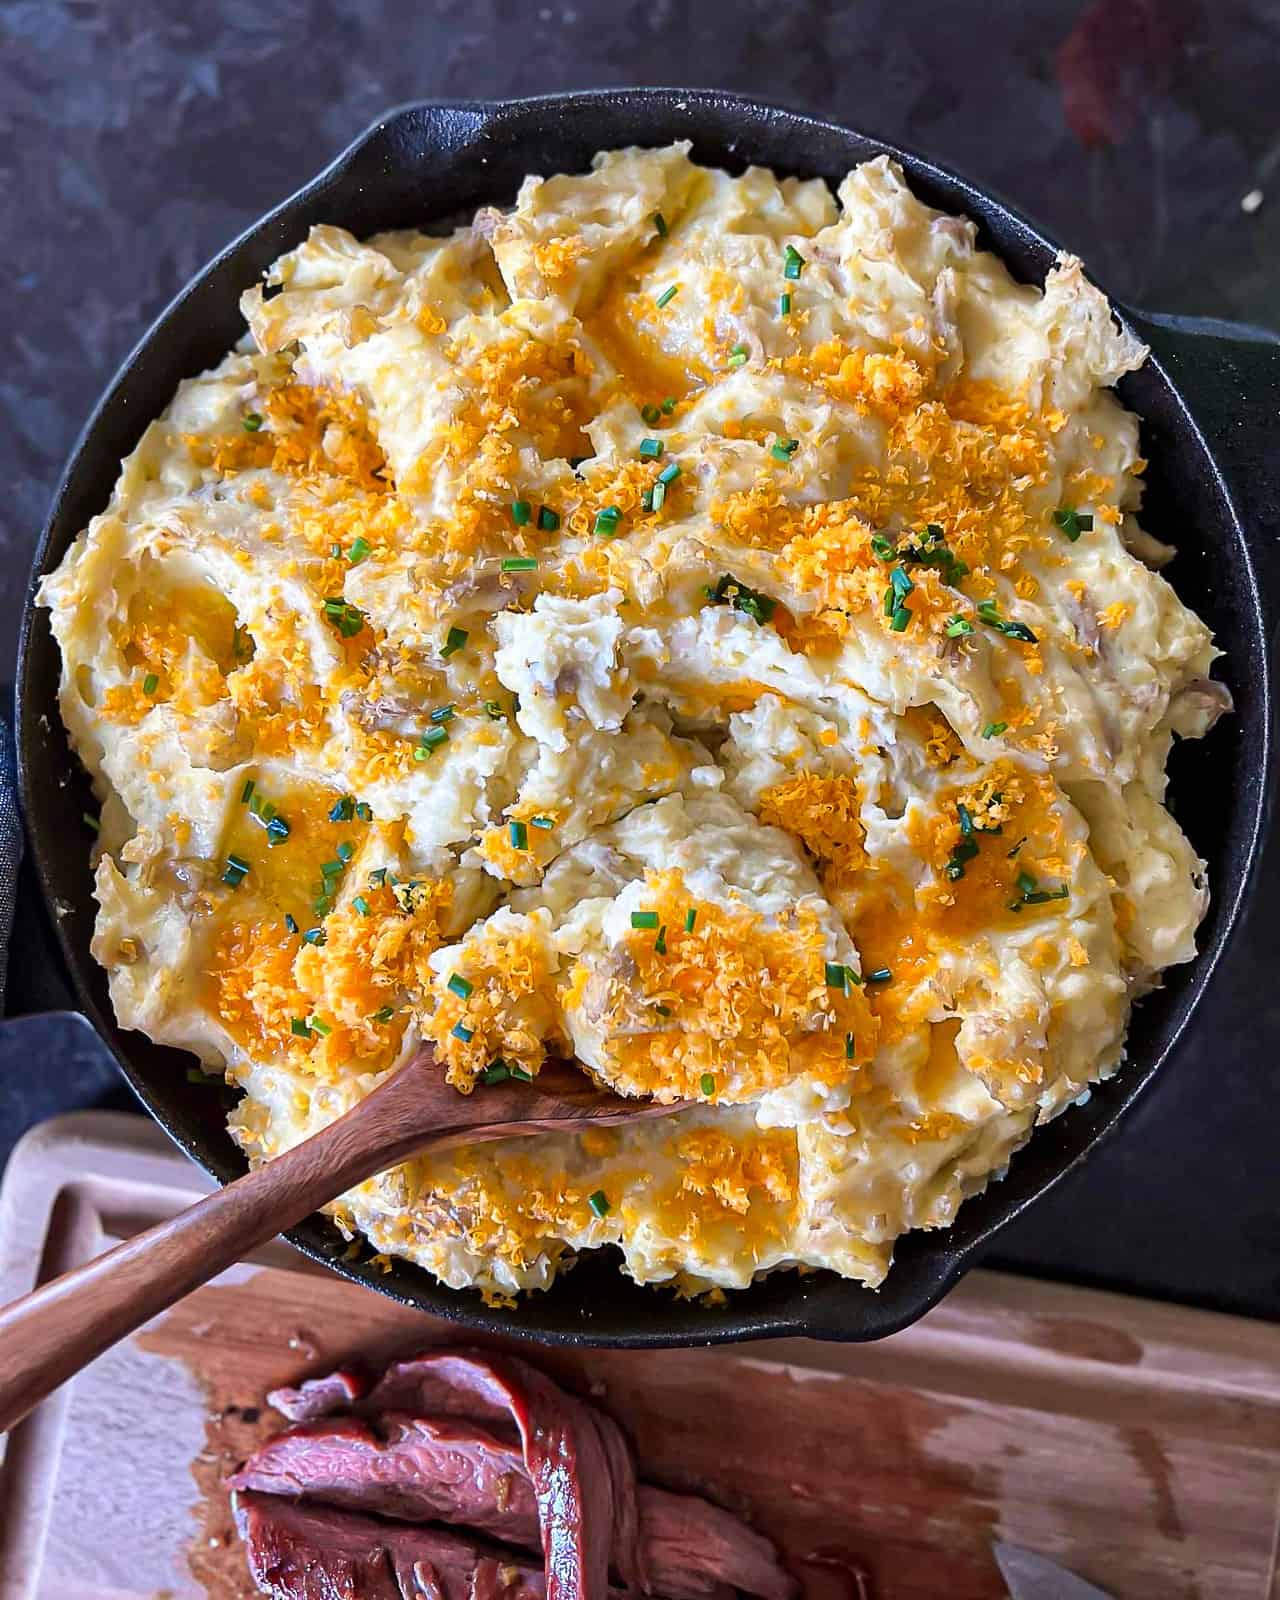 Smoked garlic mashed potatoes with cheddar cheese and chives on top